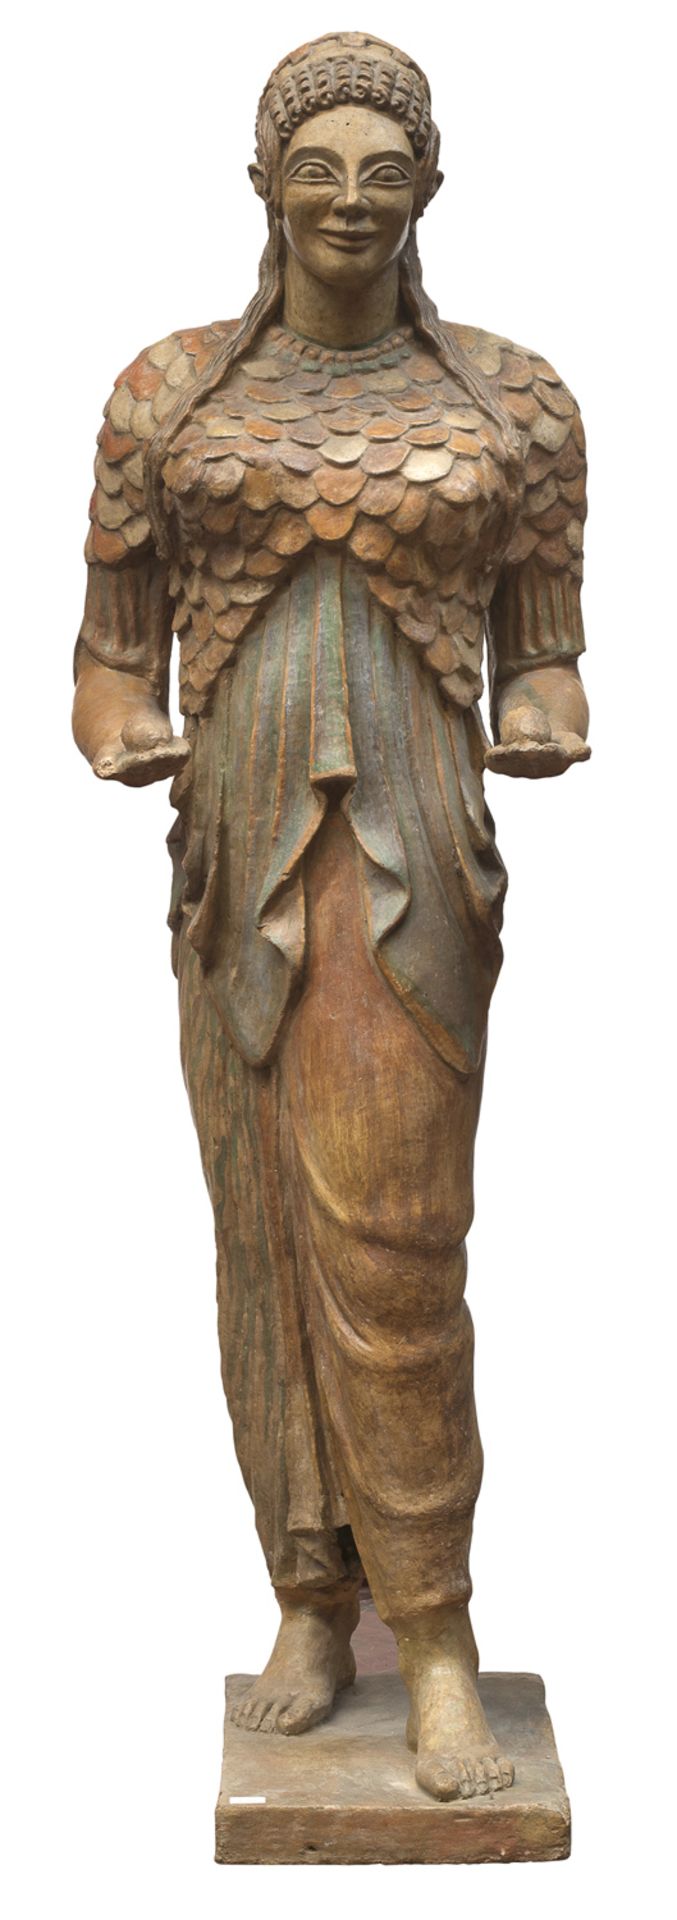 SCULPTURE OF ETRUSCAN OFFERING FIGURE EARLY 20TH CENTURY